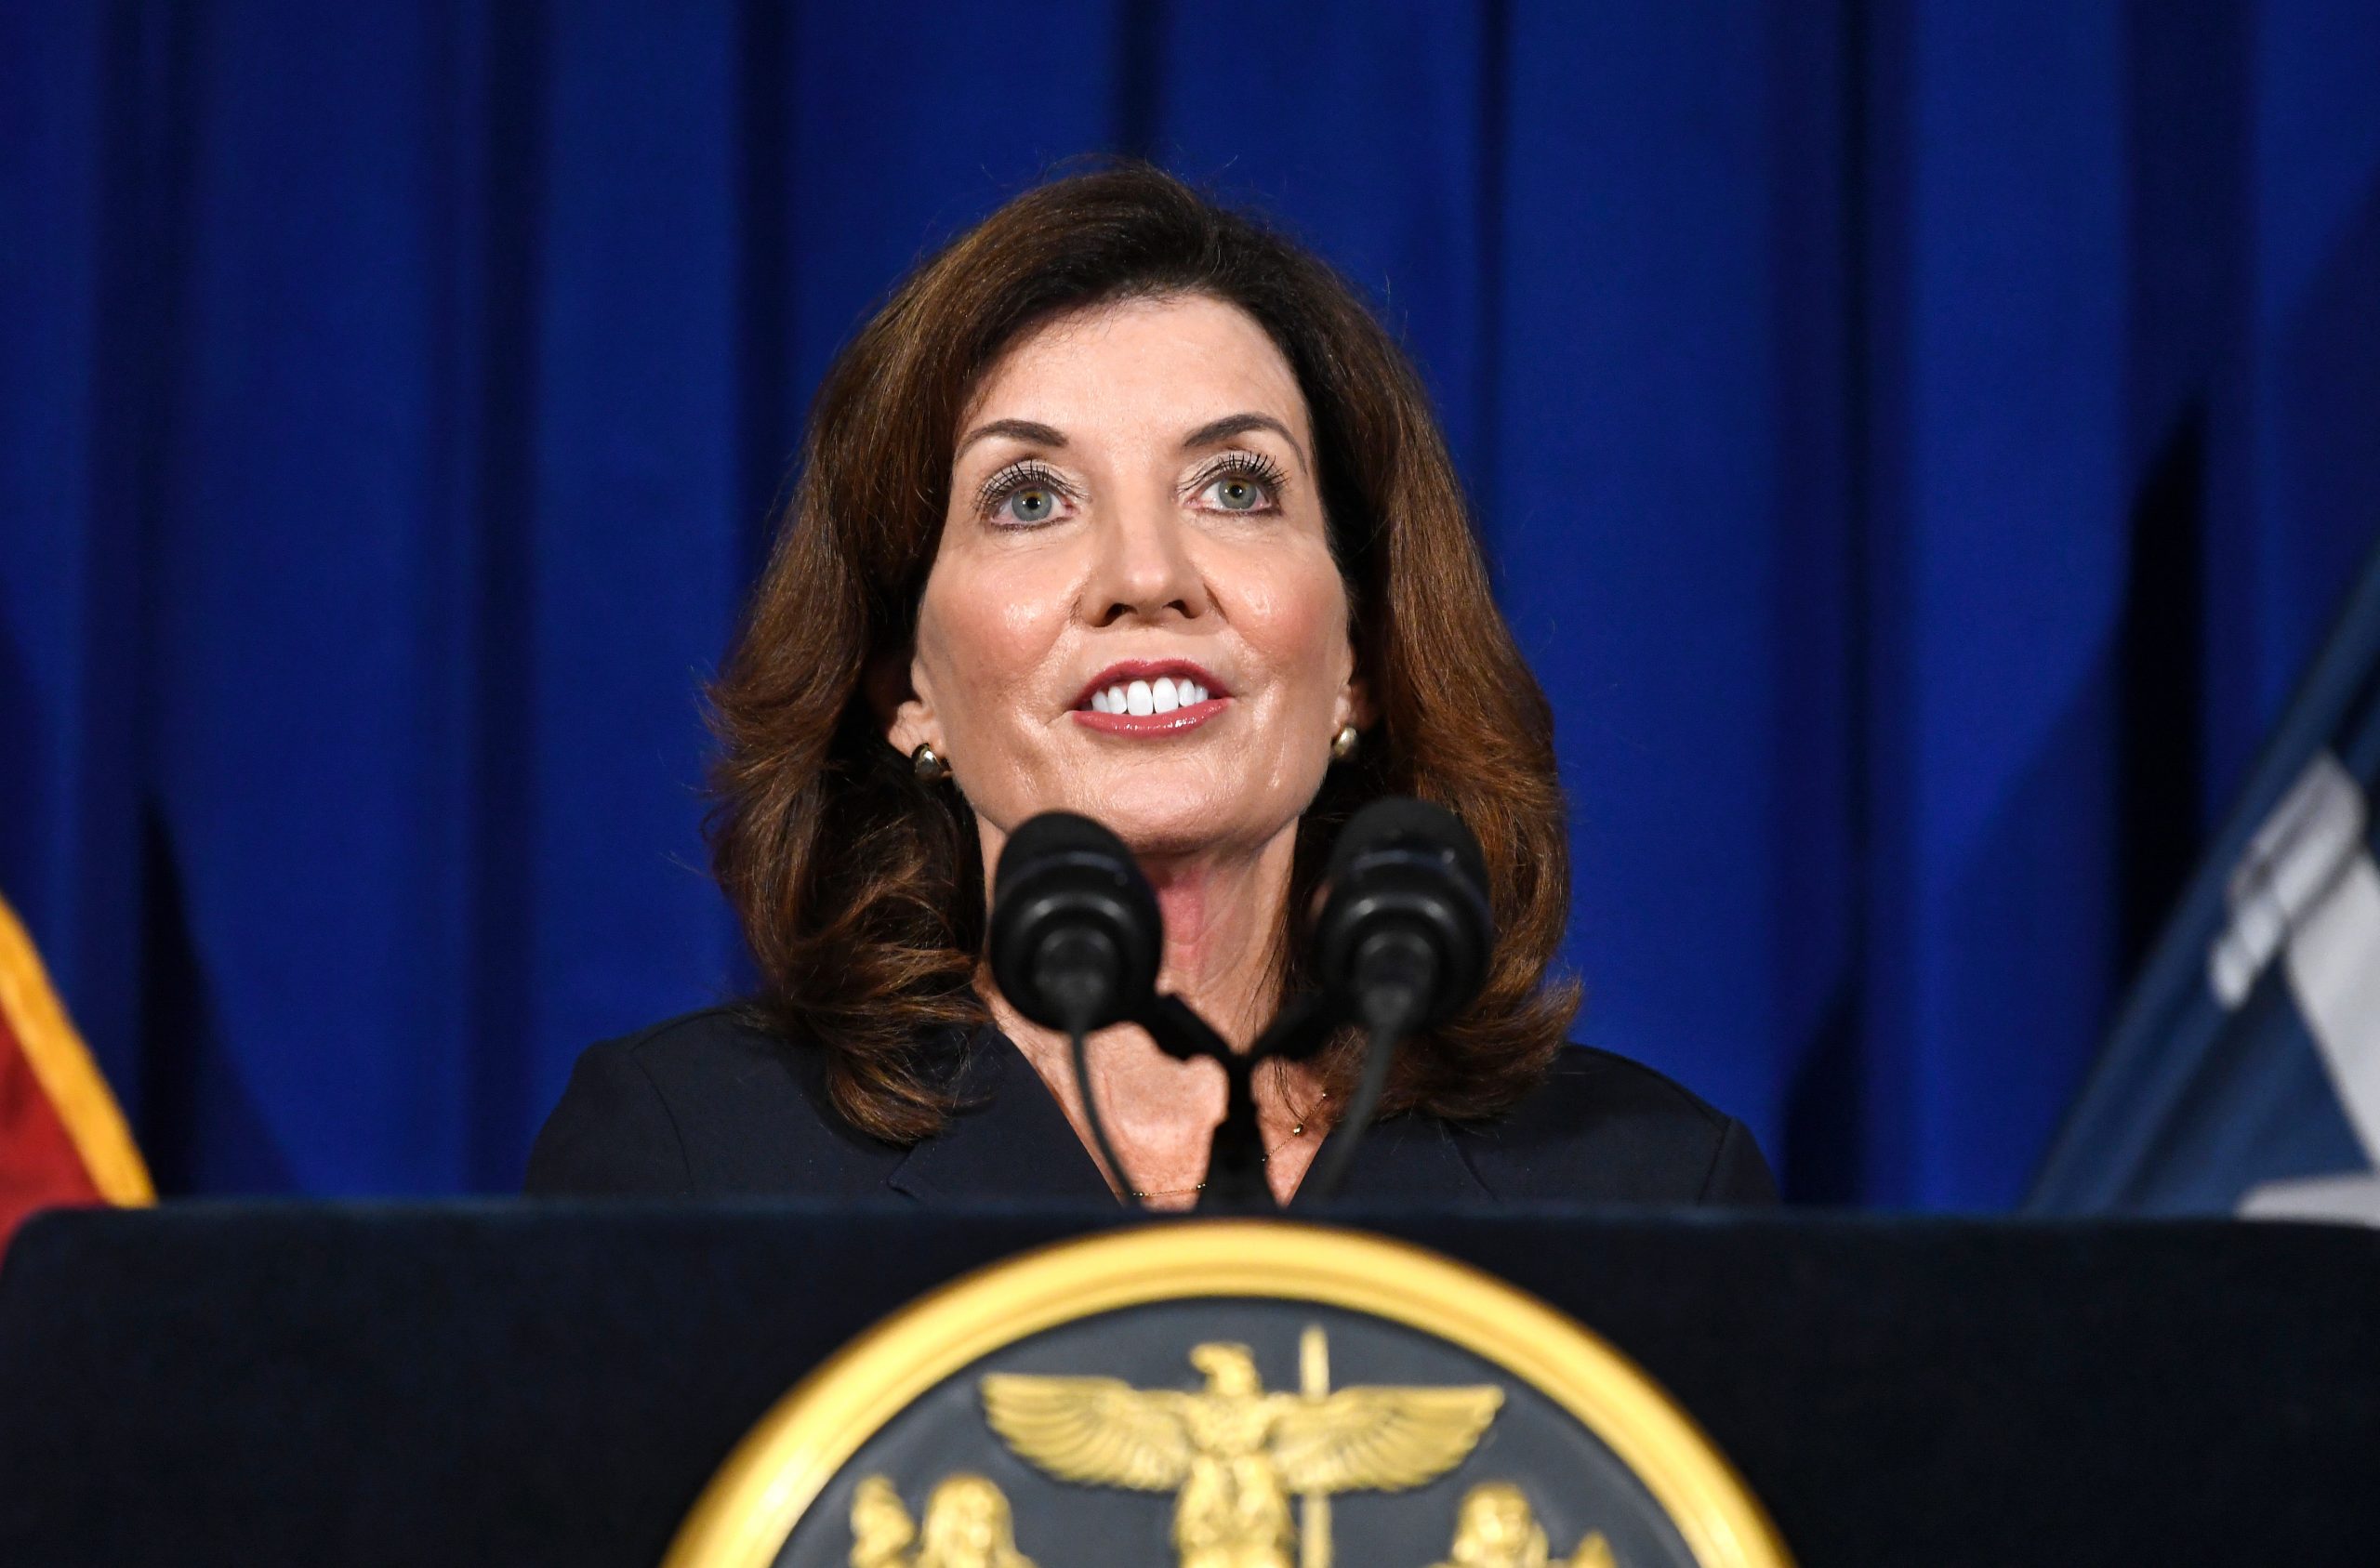 NY Gov. Kathy Hochul signs law raising age to own semiautomatic rifle